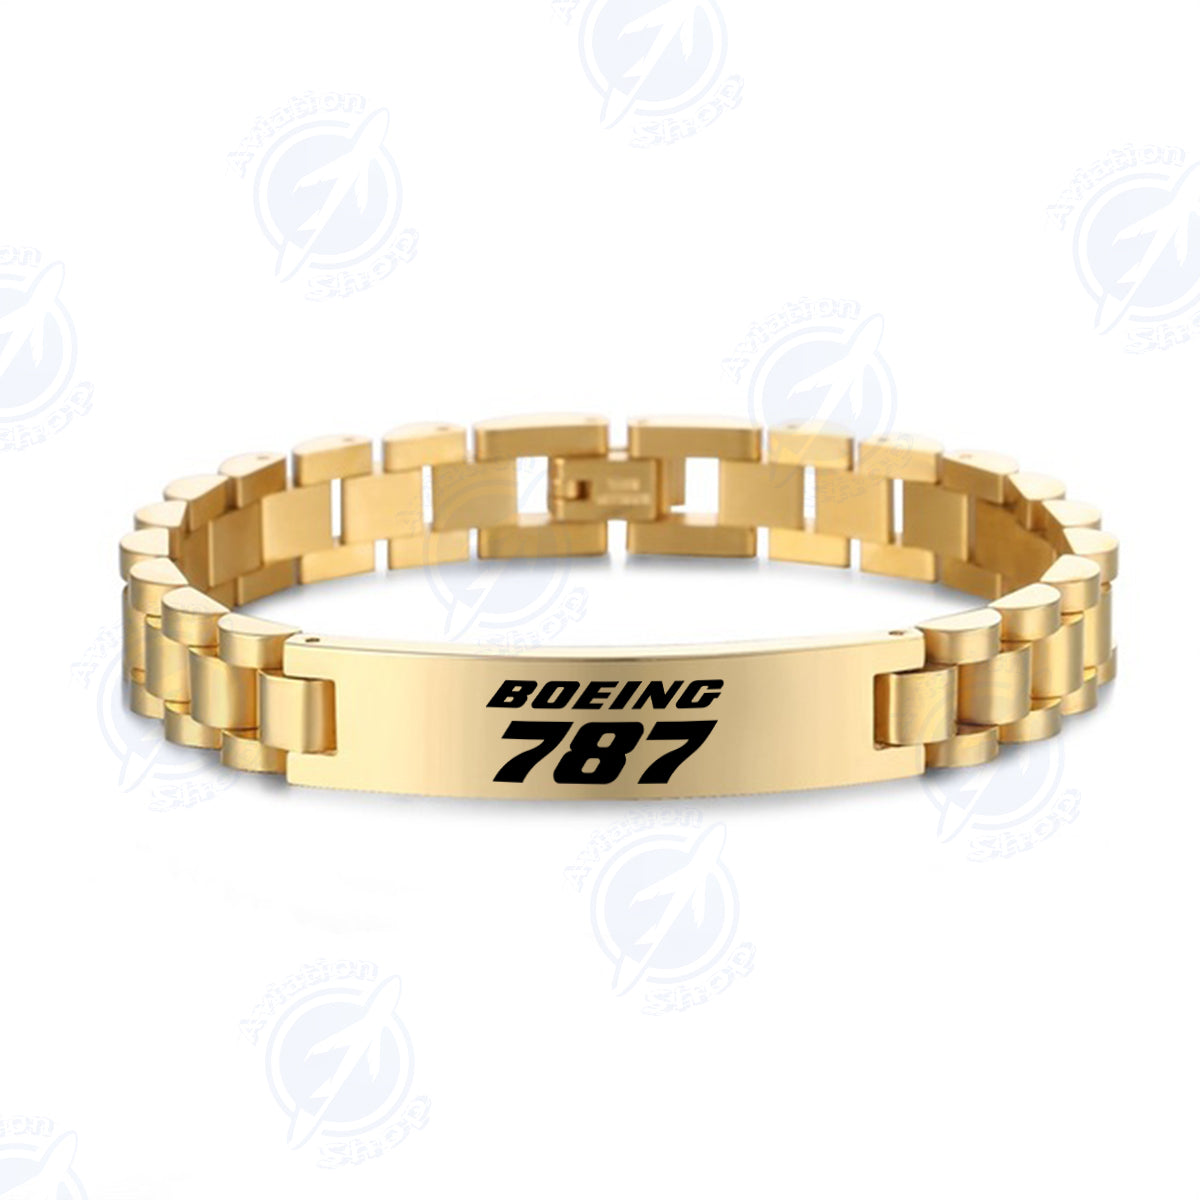 Boeing 787 & Text Designed Stainless Steel Chain Bracelets